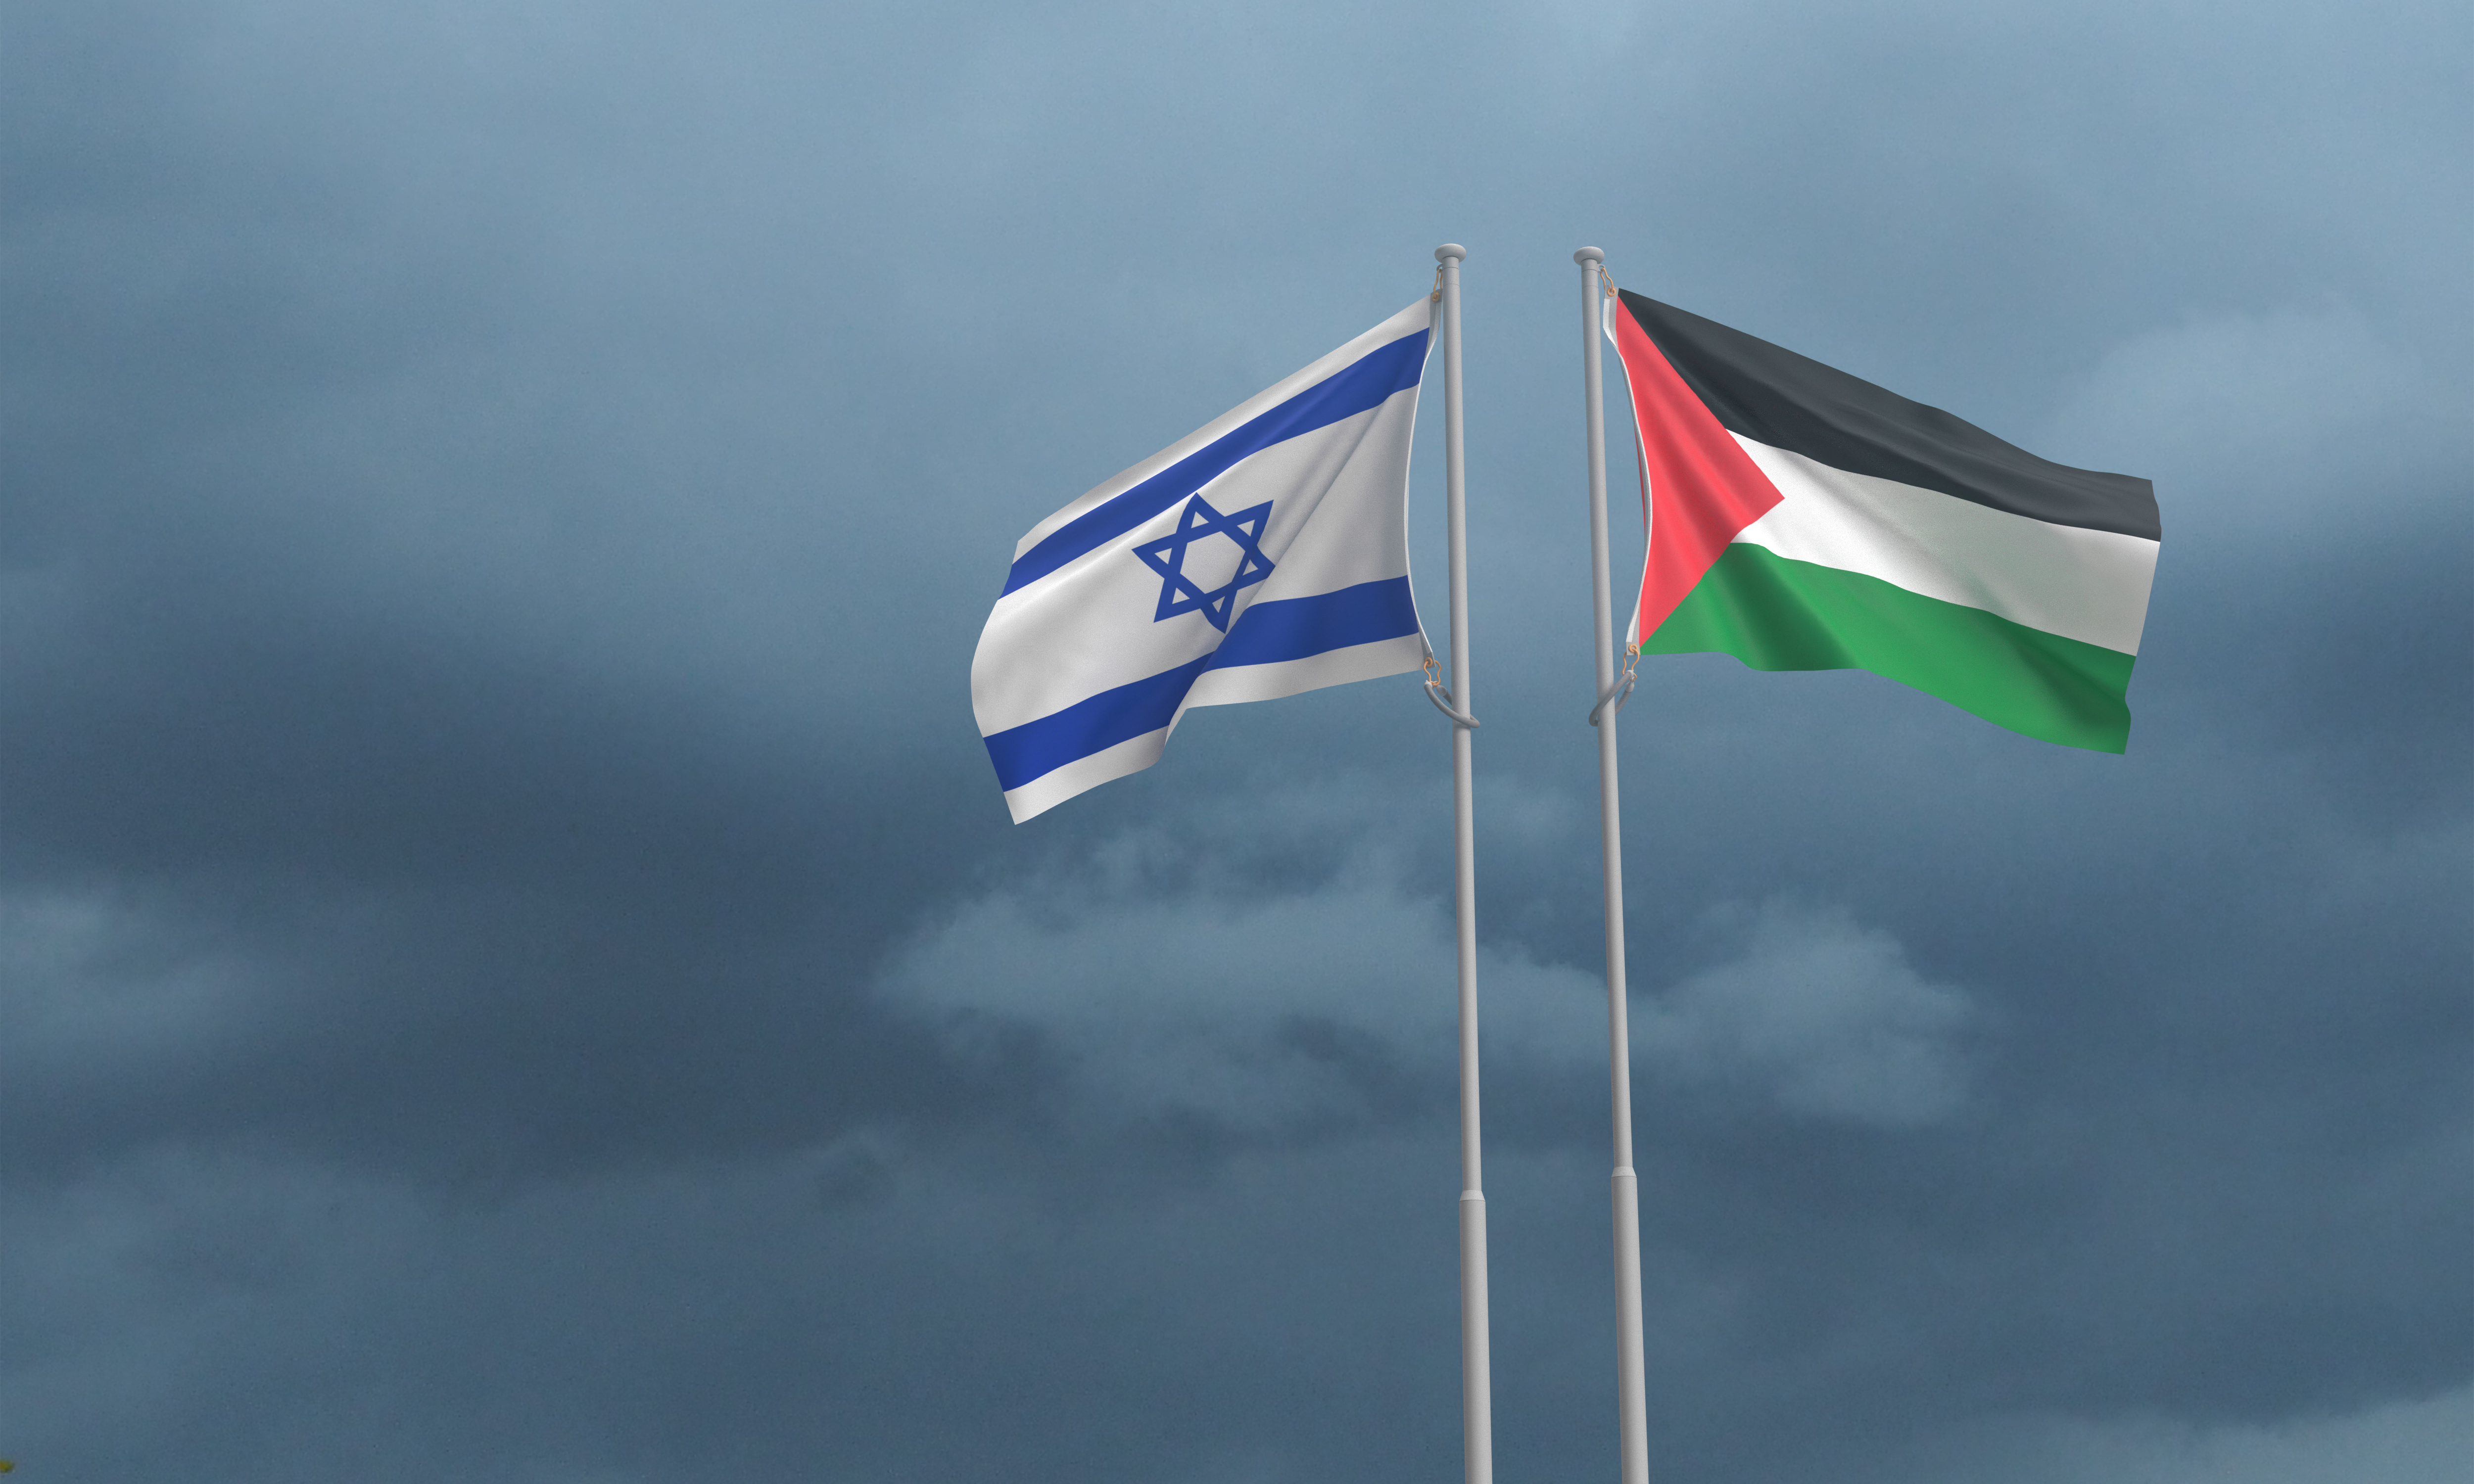 Israel and Palestine flags waving high in the sky